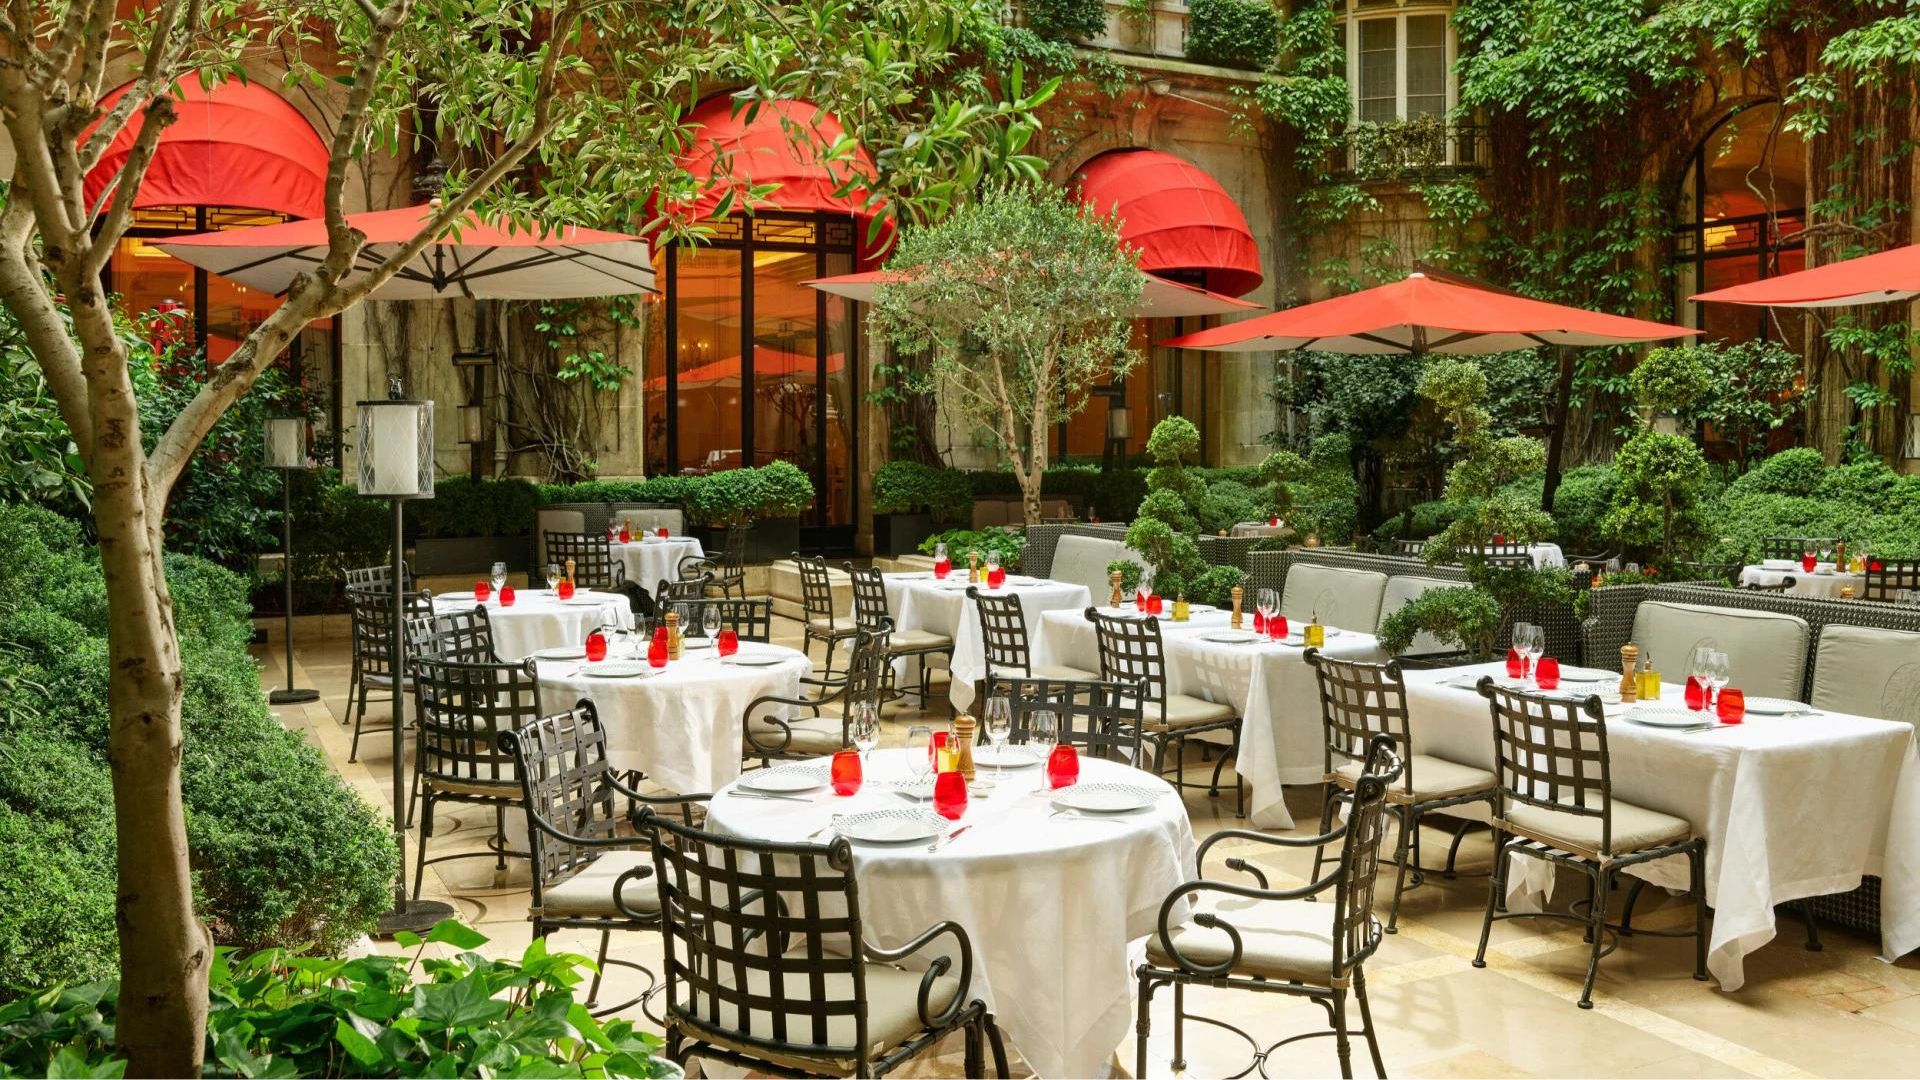 The Cour Jardin du Plaza Athénée invites you to a plant-based getaway with Jean Imbert this summer